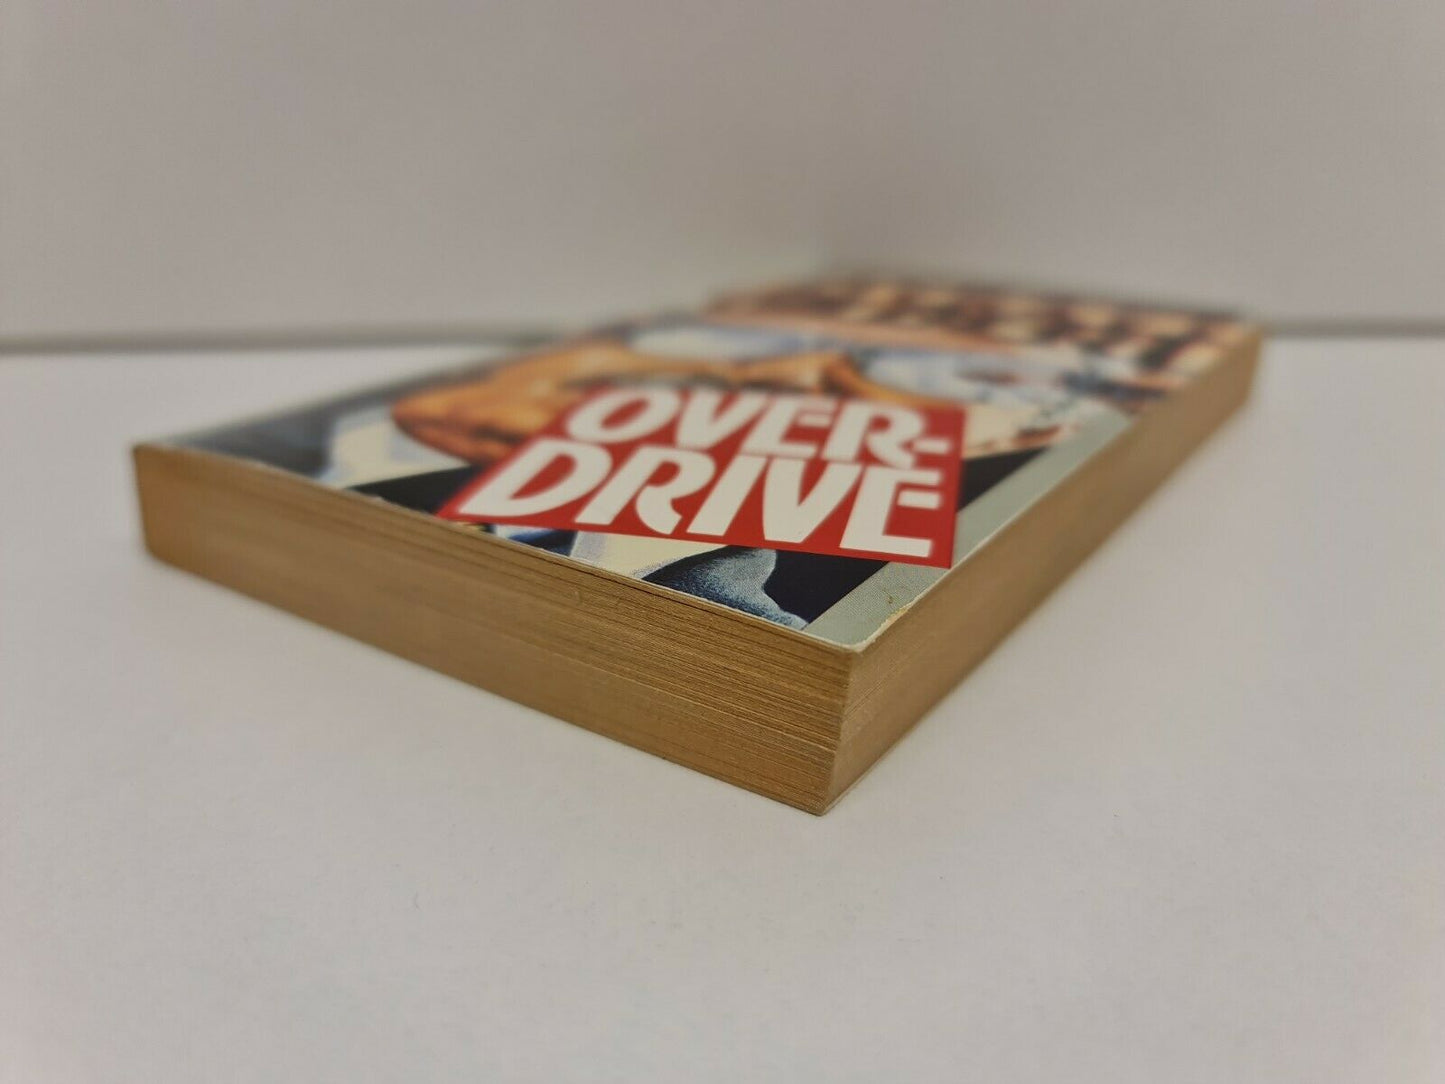 Over-Drive by Michael Gilbert (1988)